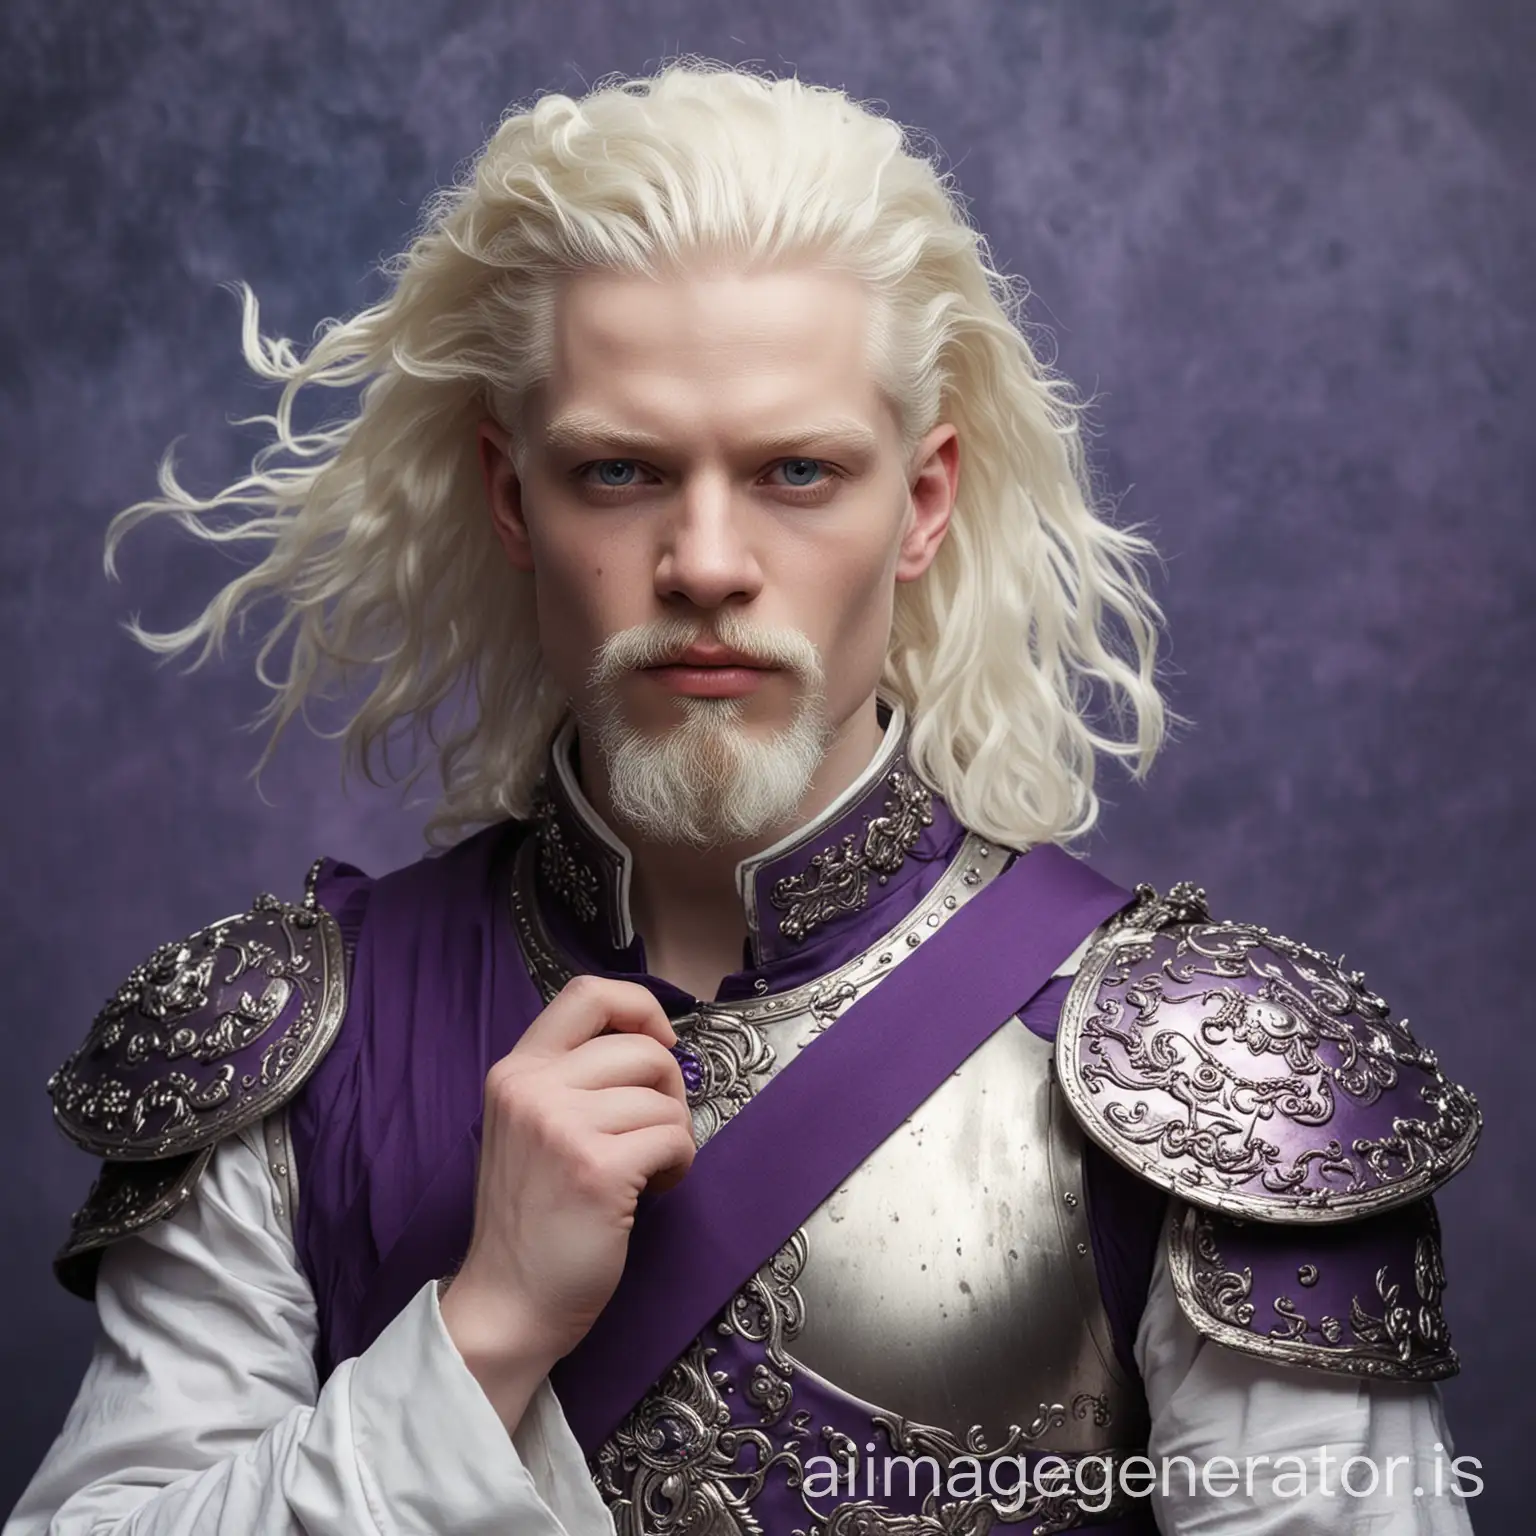 Albino-Man-in-Violet-Armor-Posing-with-Scepter-under-Blue-Clouds